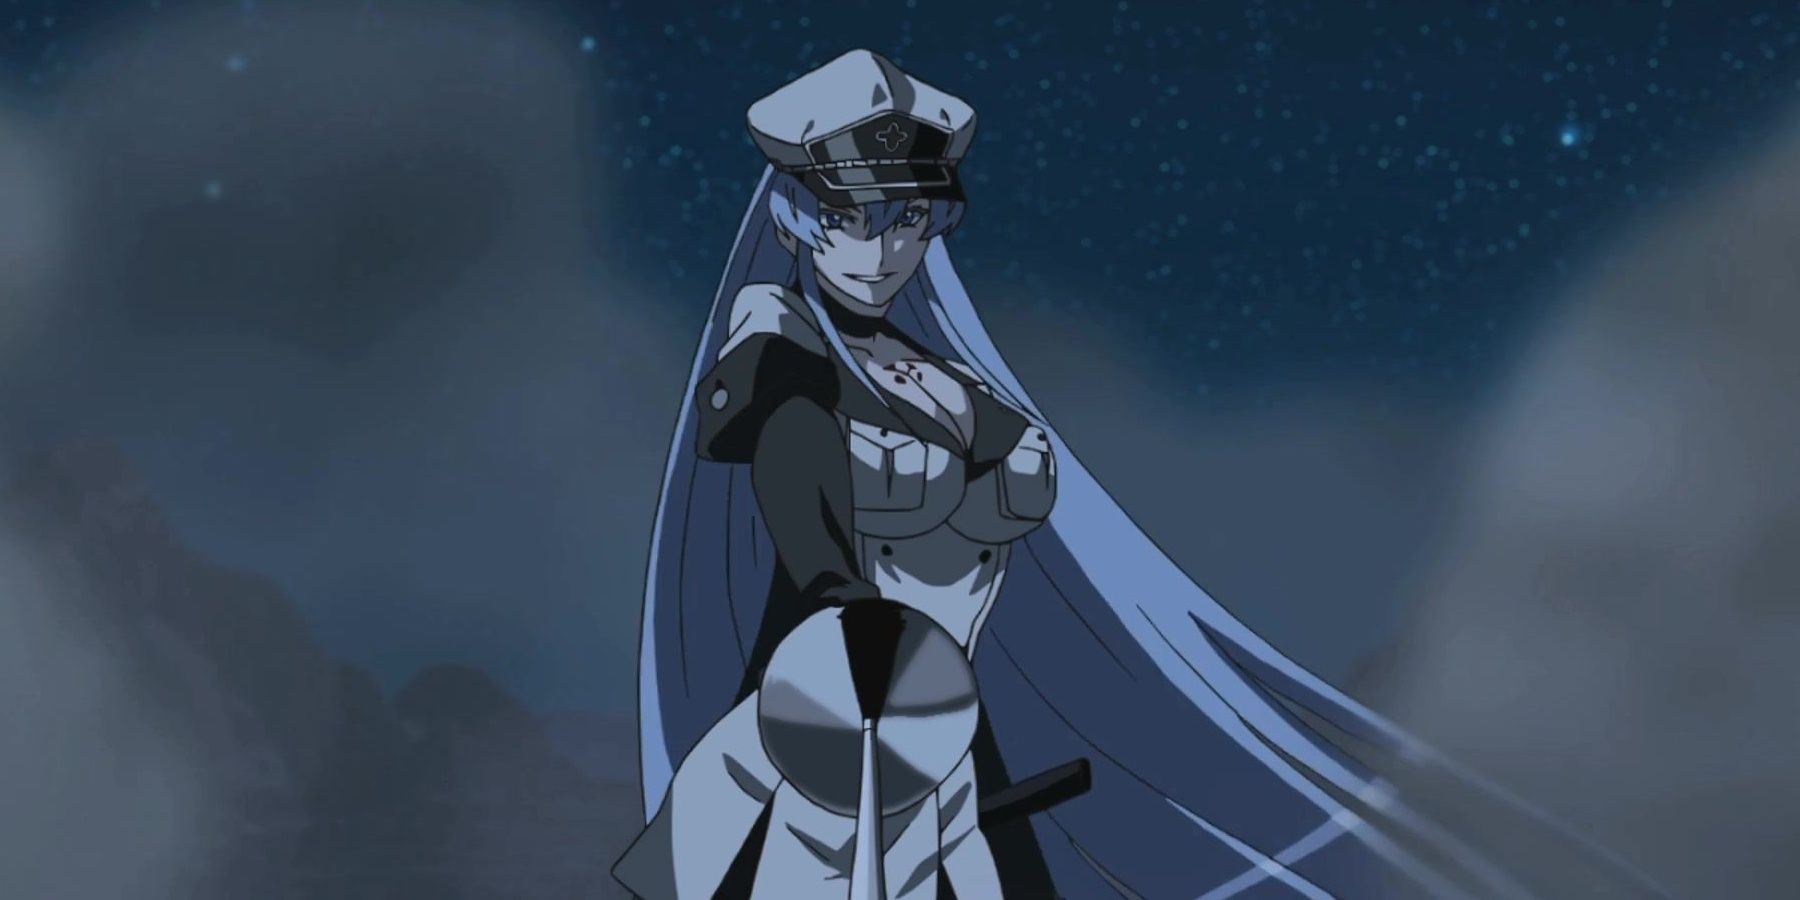 Esdeath with sword from Akame Ga Kill